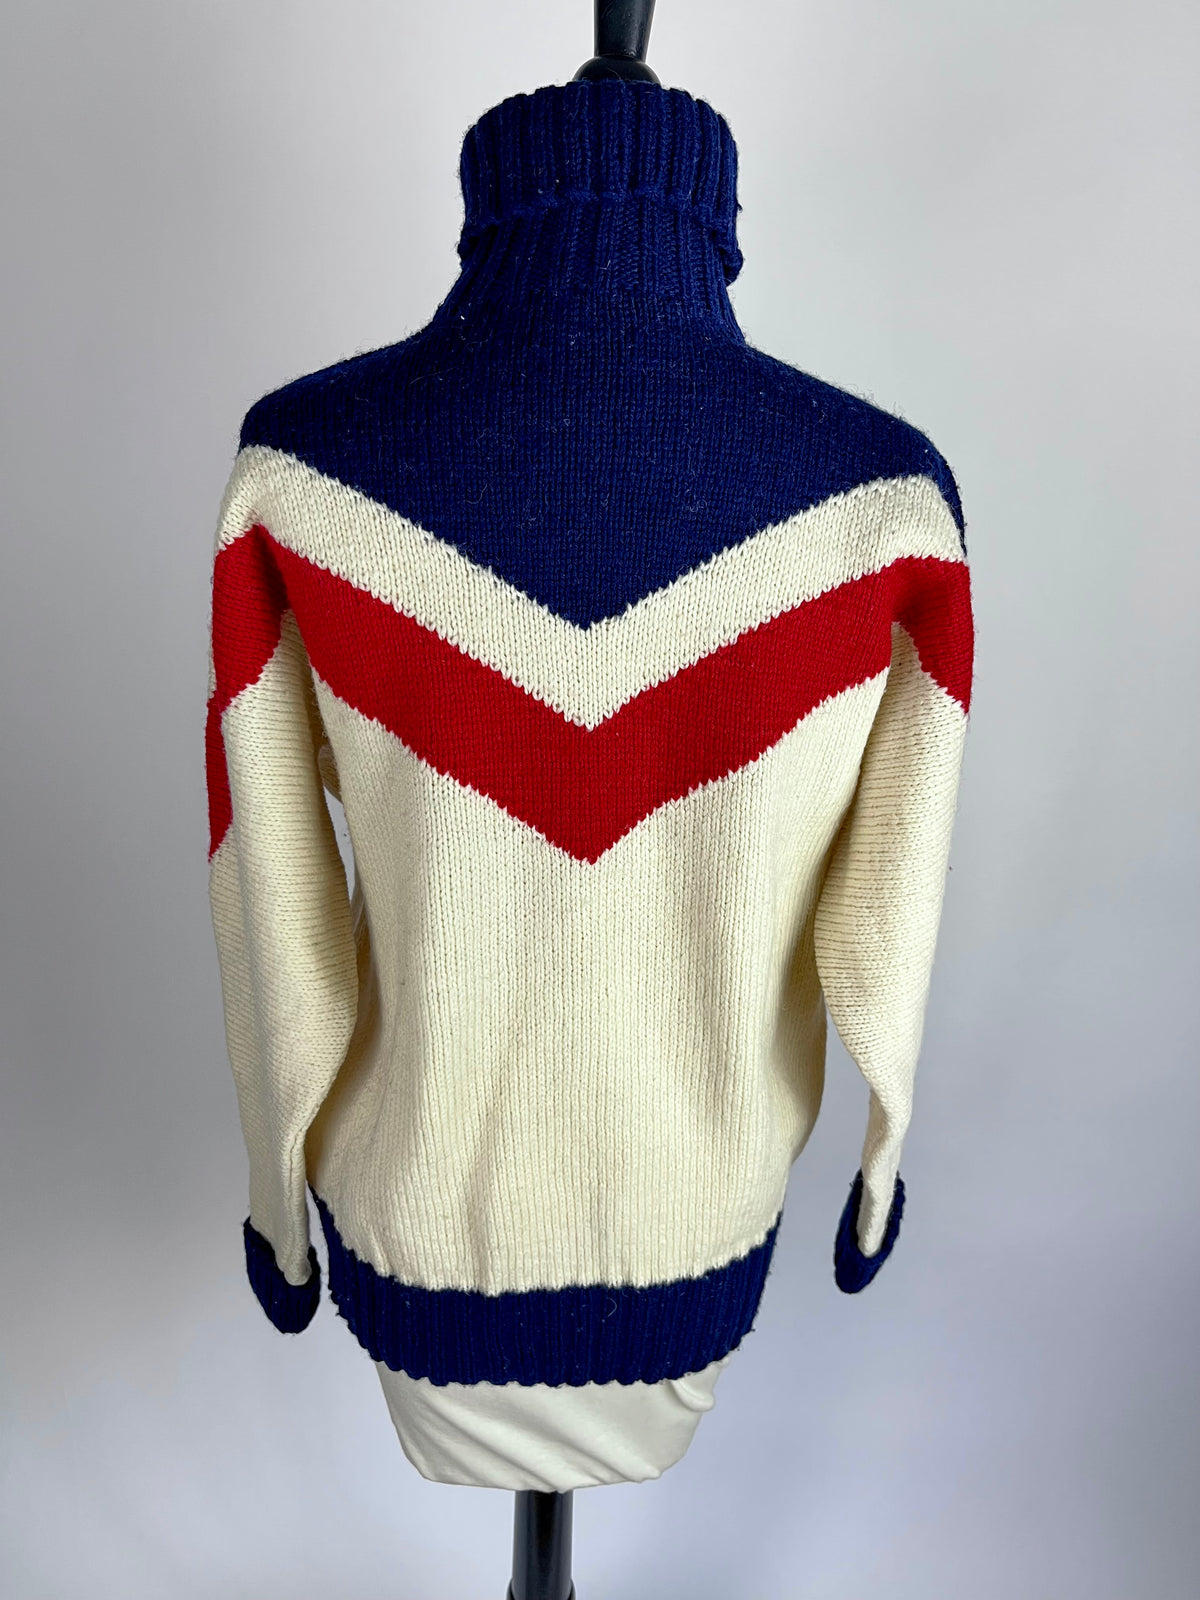 Vintage Hand-Knit Wool Sweater by Mildred Nolan